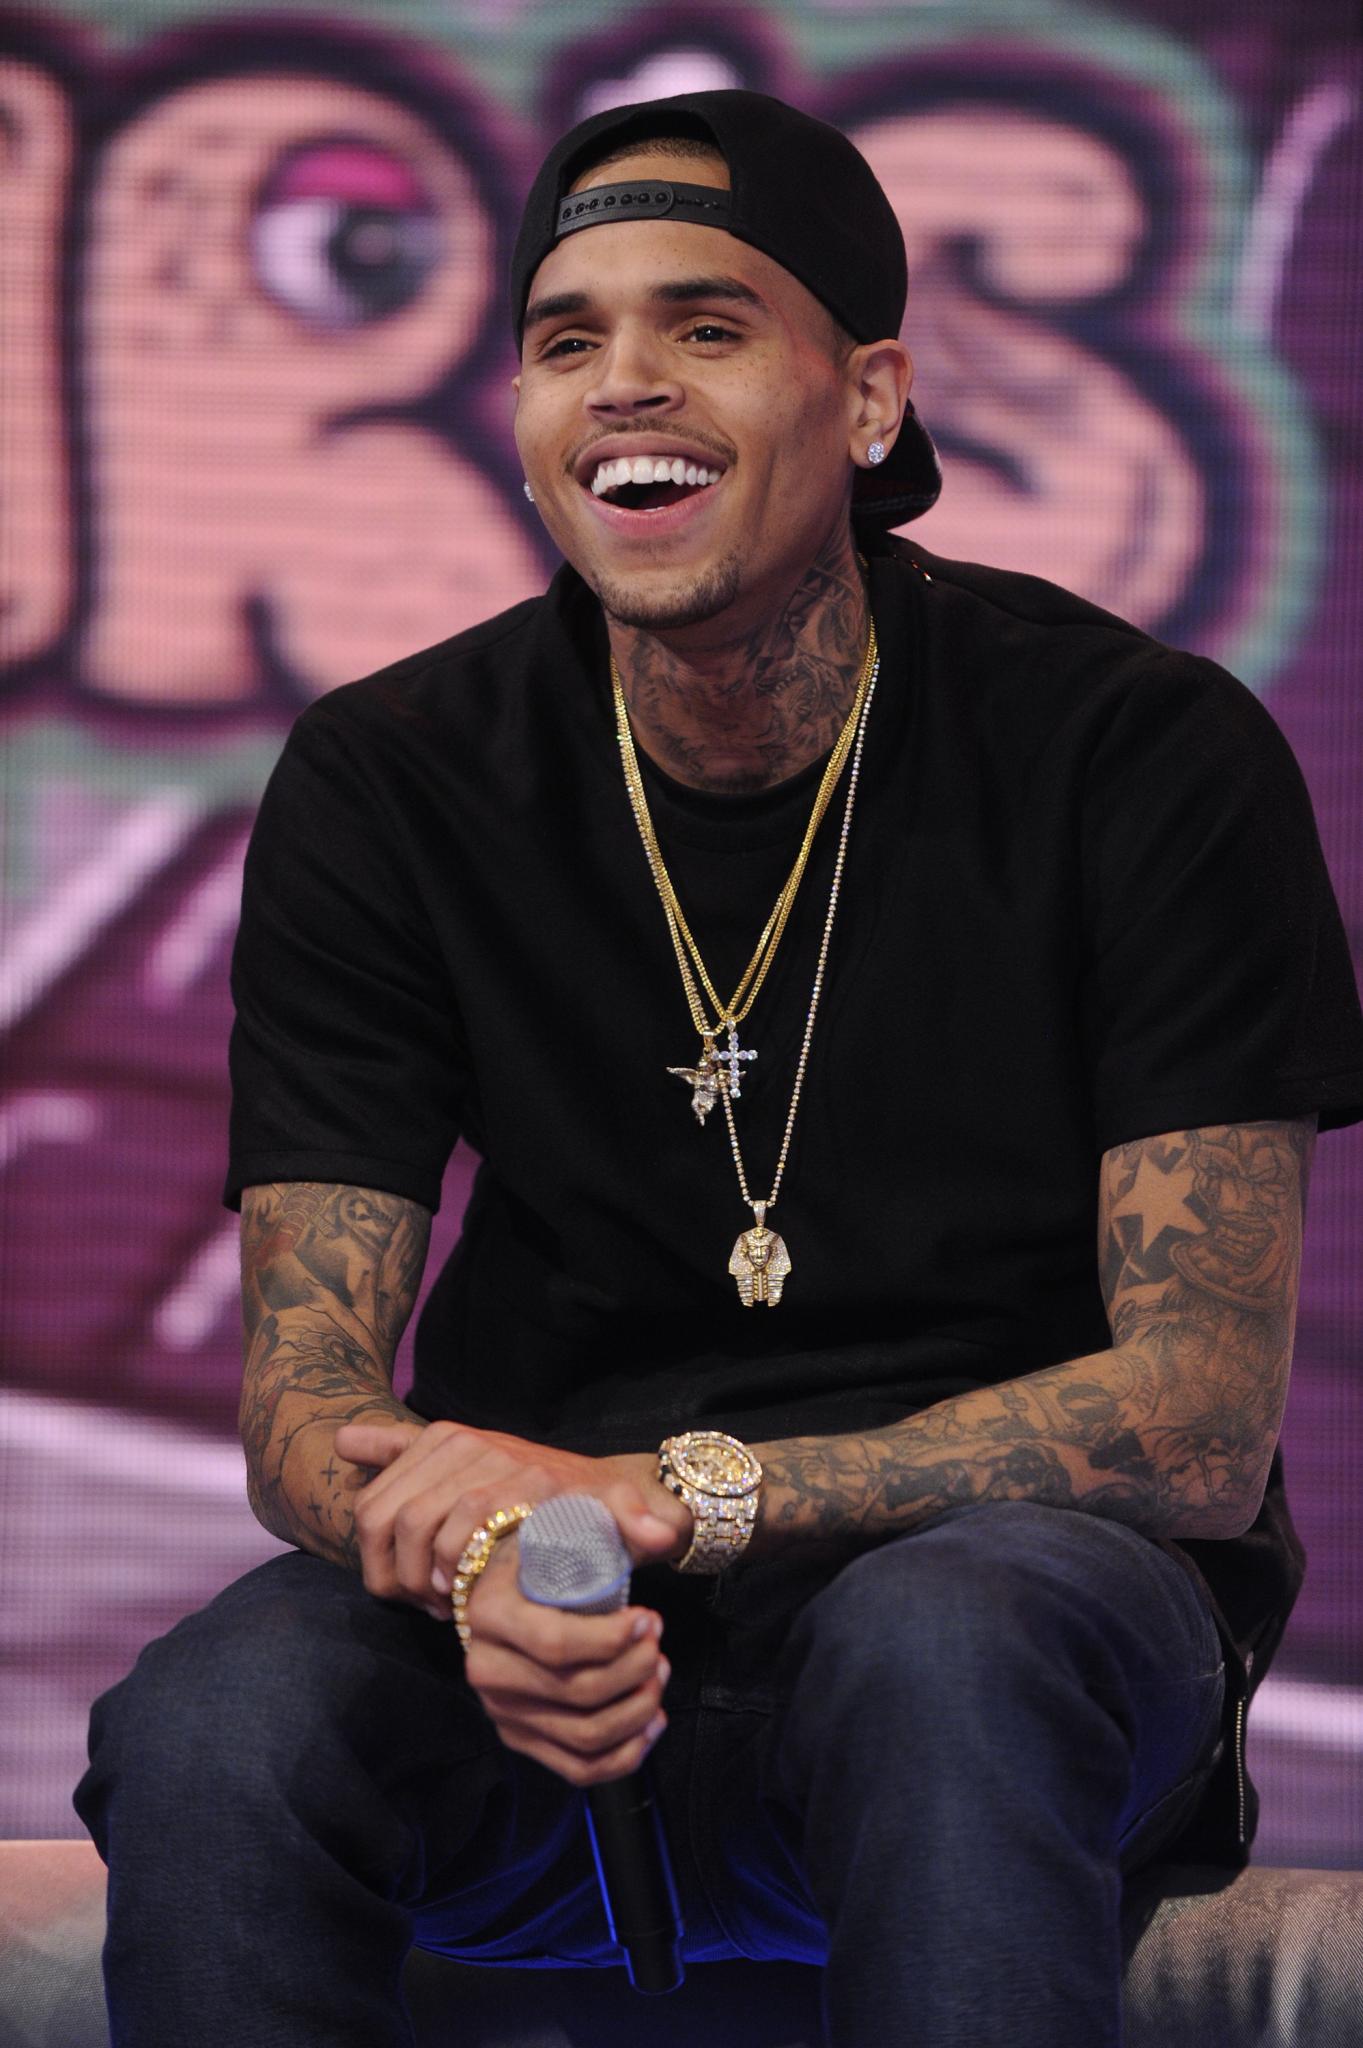 Chris Brown's Felony Charges Reduced to a Misdemeanor